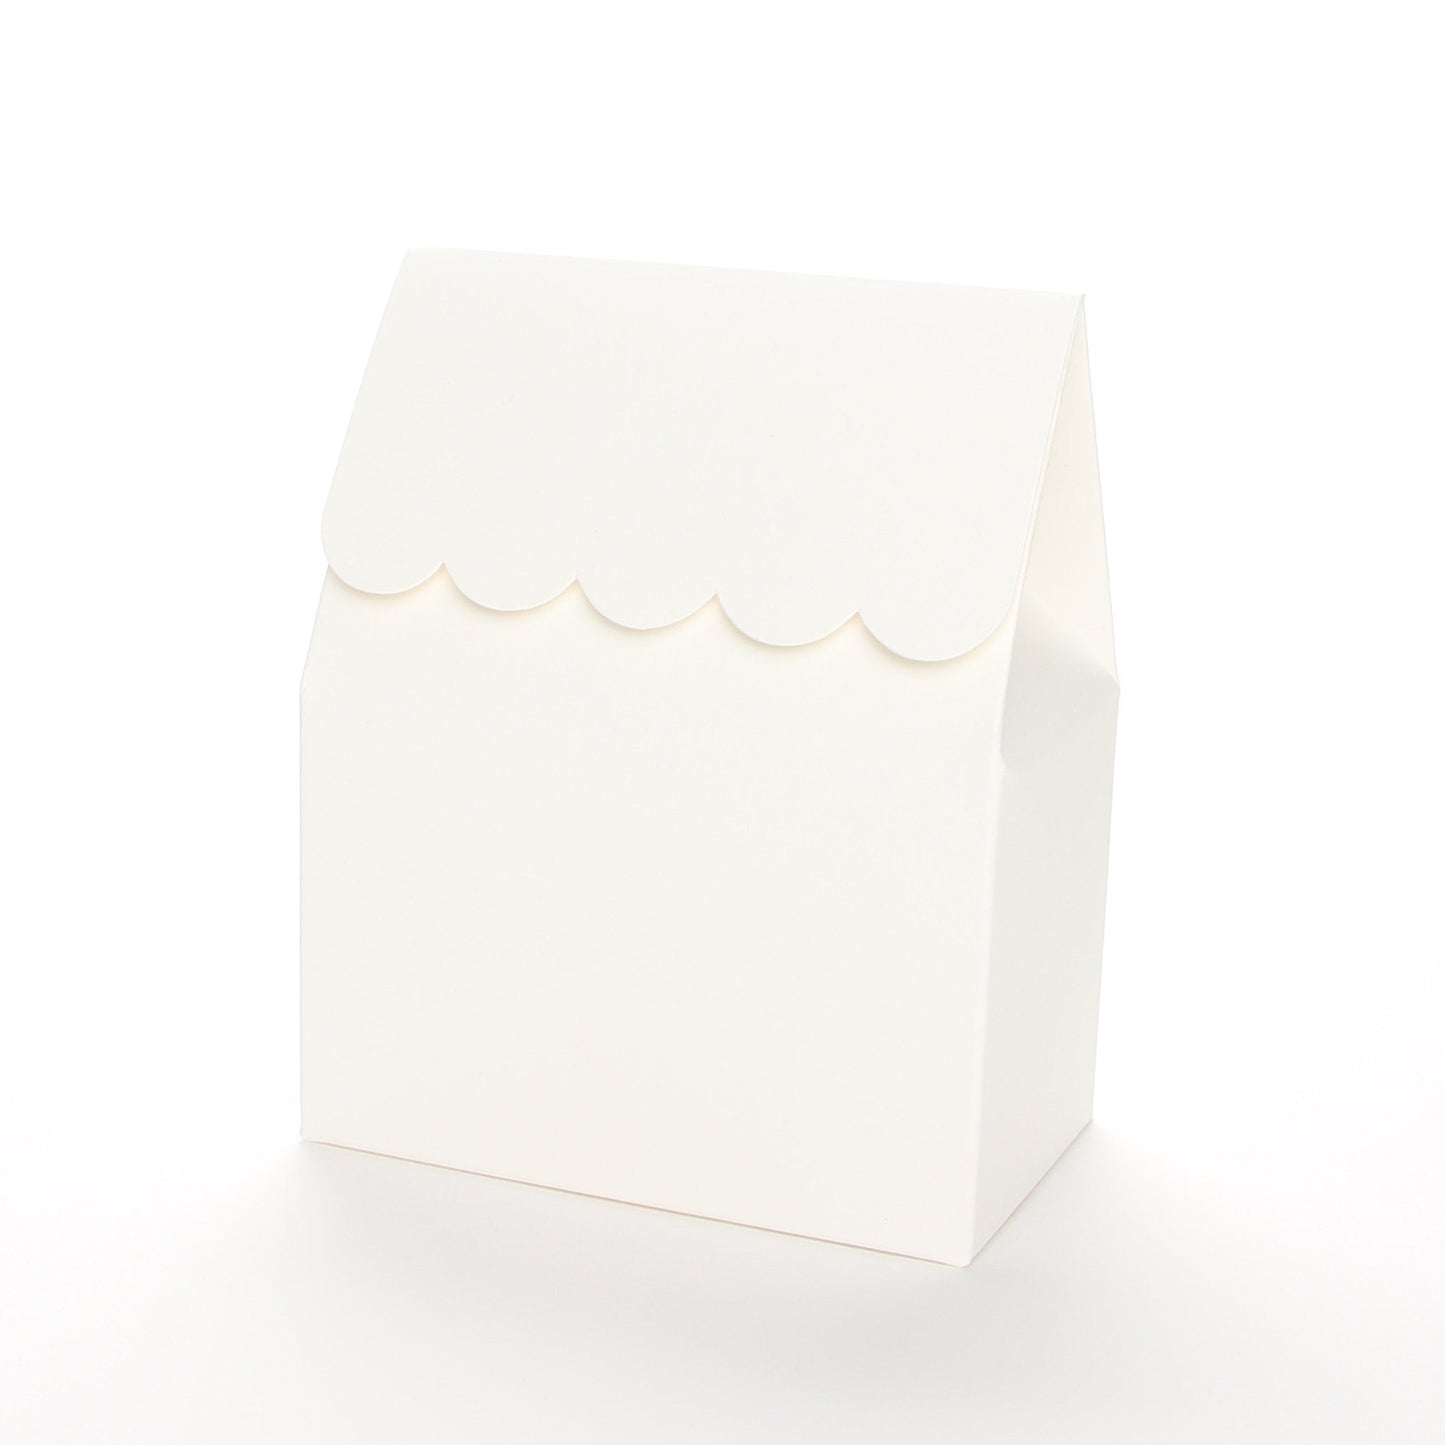 Ivory favor box by Lux Party with a scalloped edge on a white background.